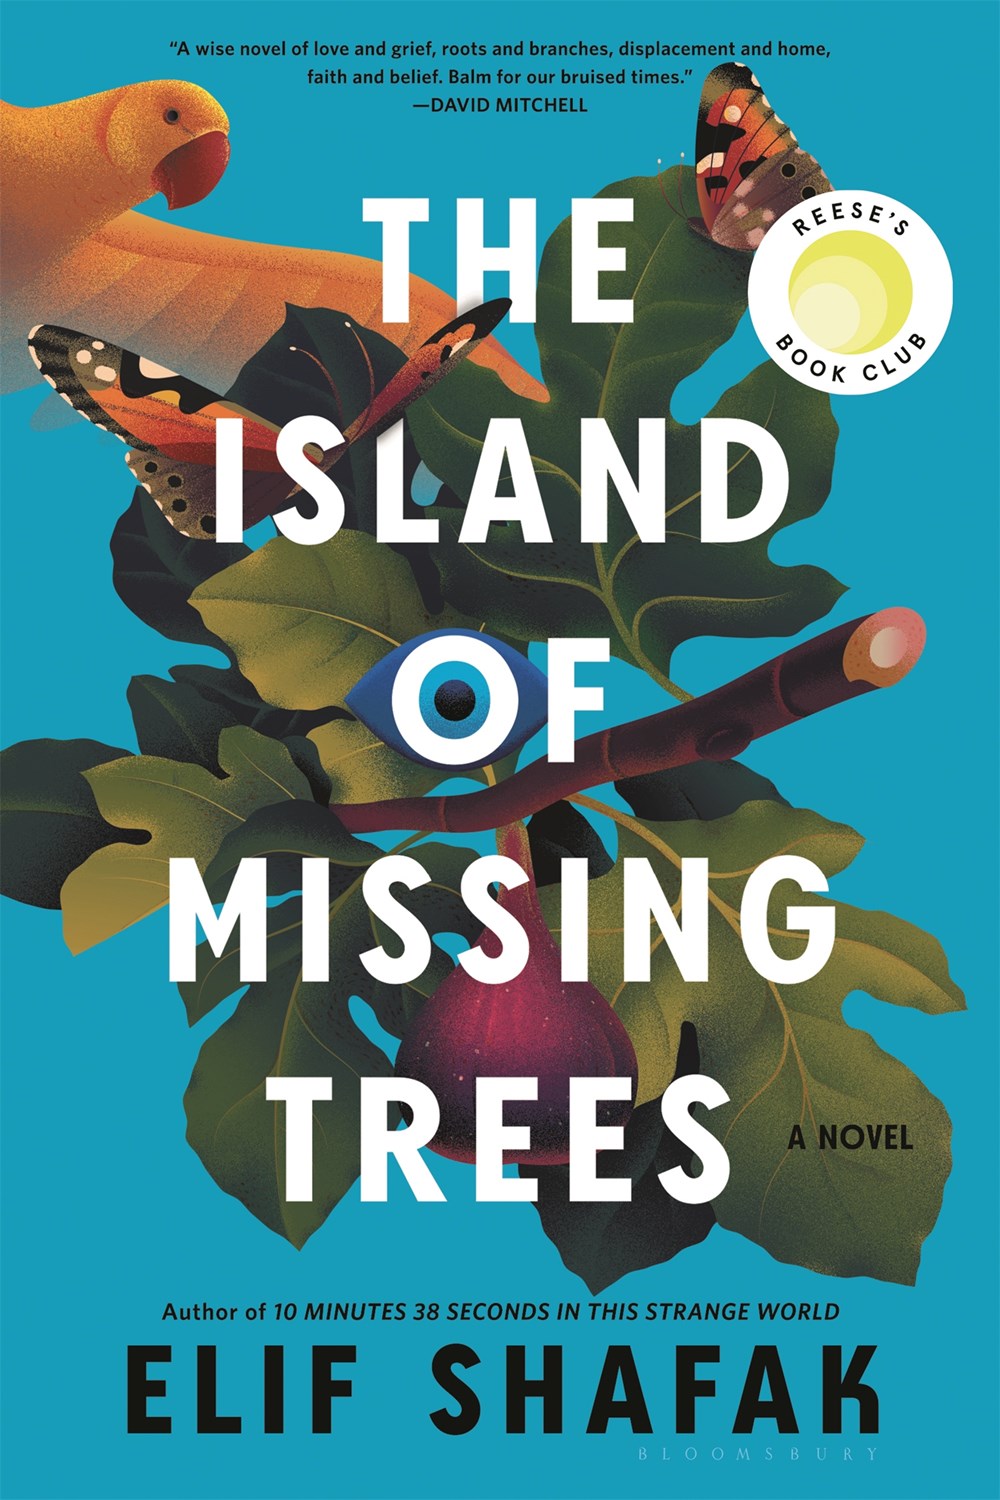 The Island of Missing Trees by Elif Shafak (Paperback)